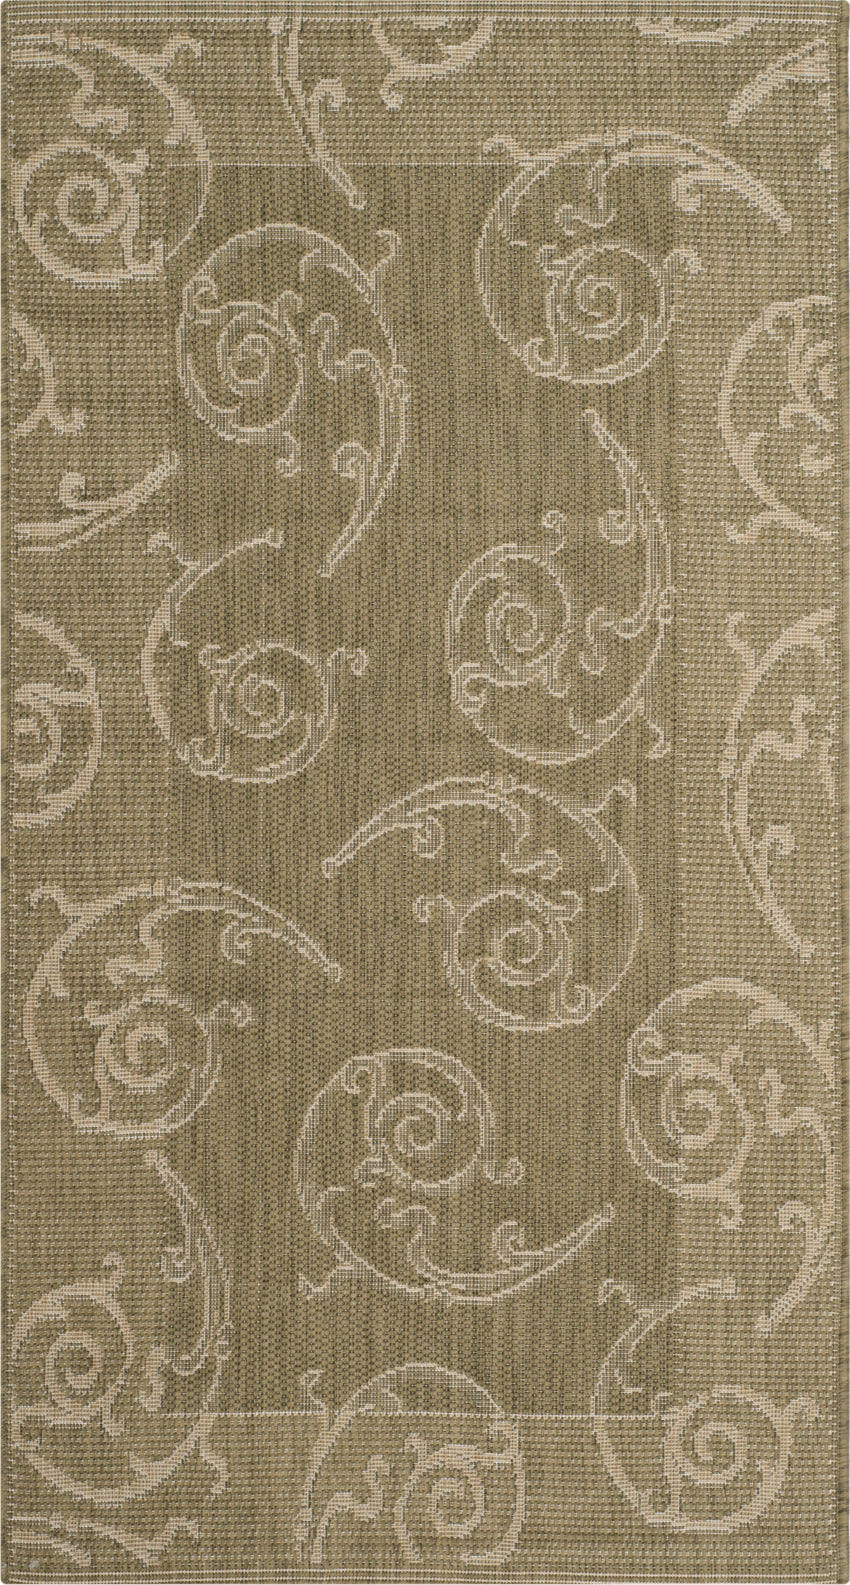 Safavieh Courtyard CY2665 Olive/Natural Area Rug main image